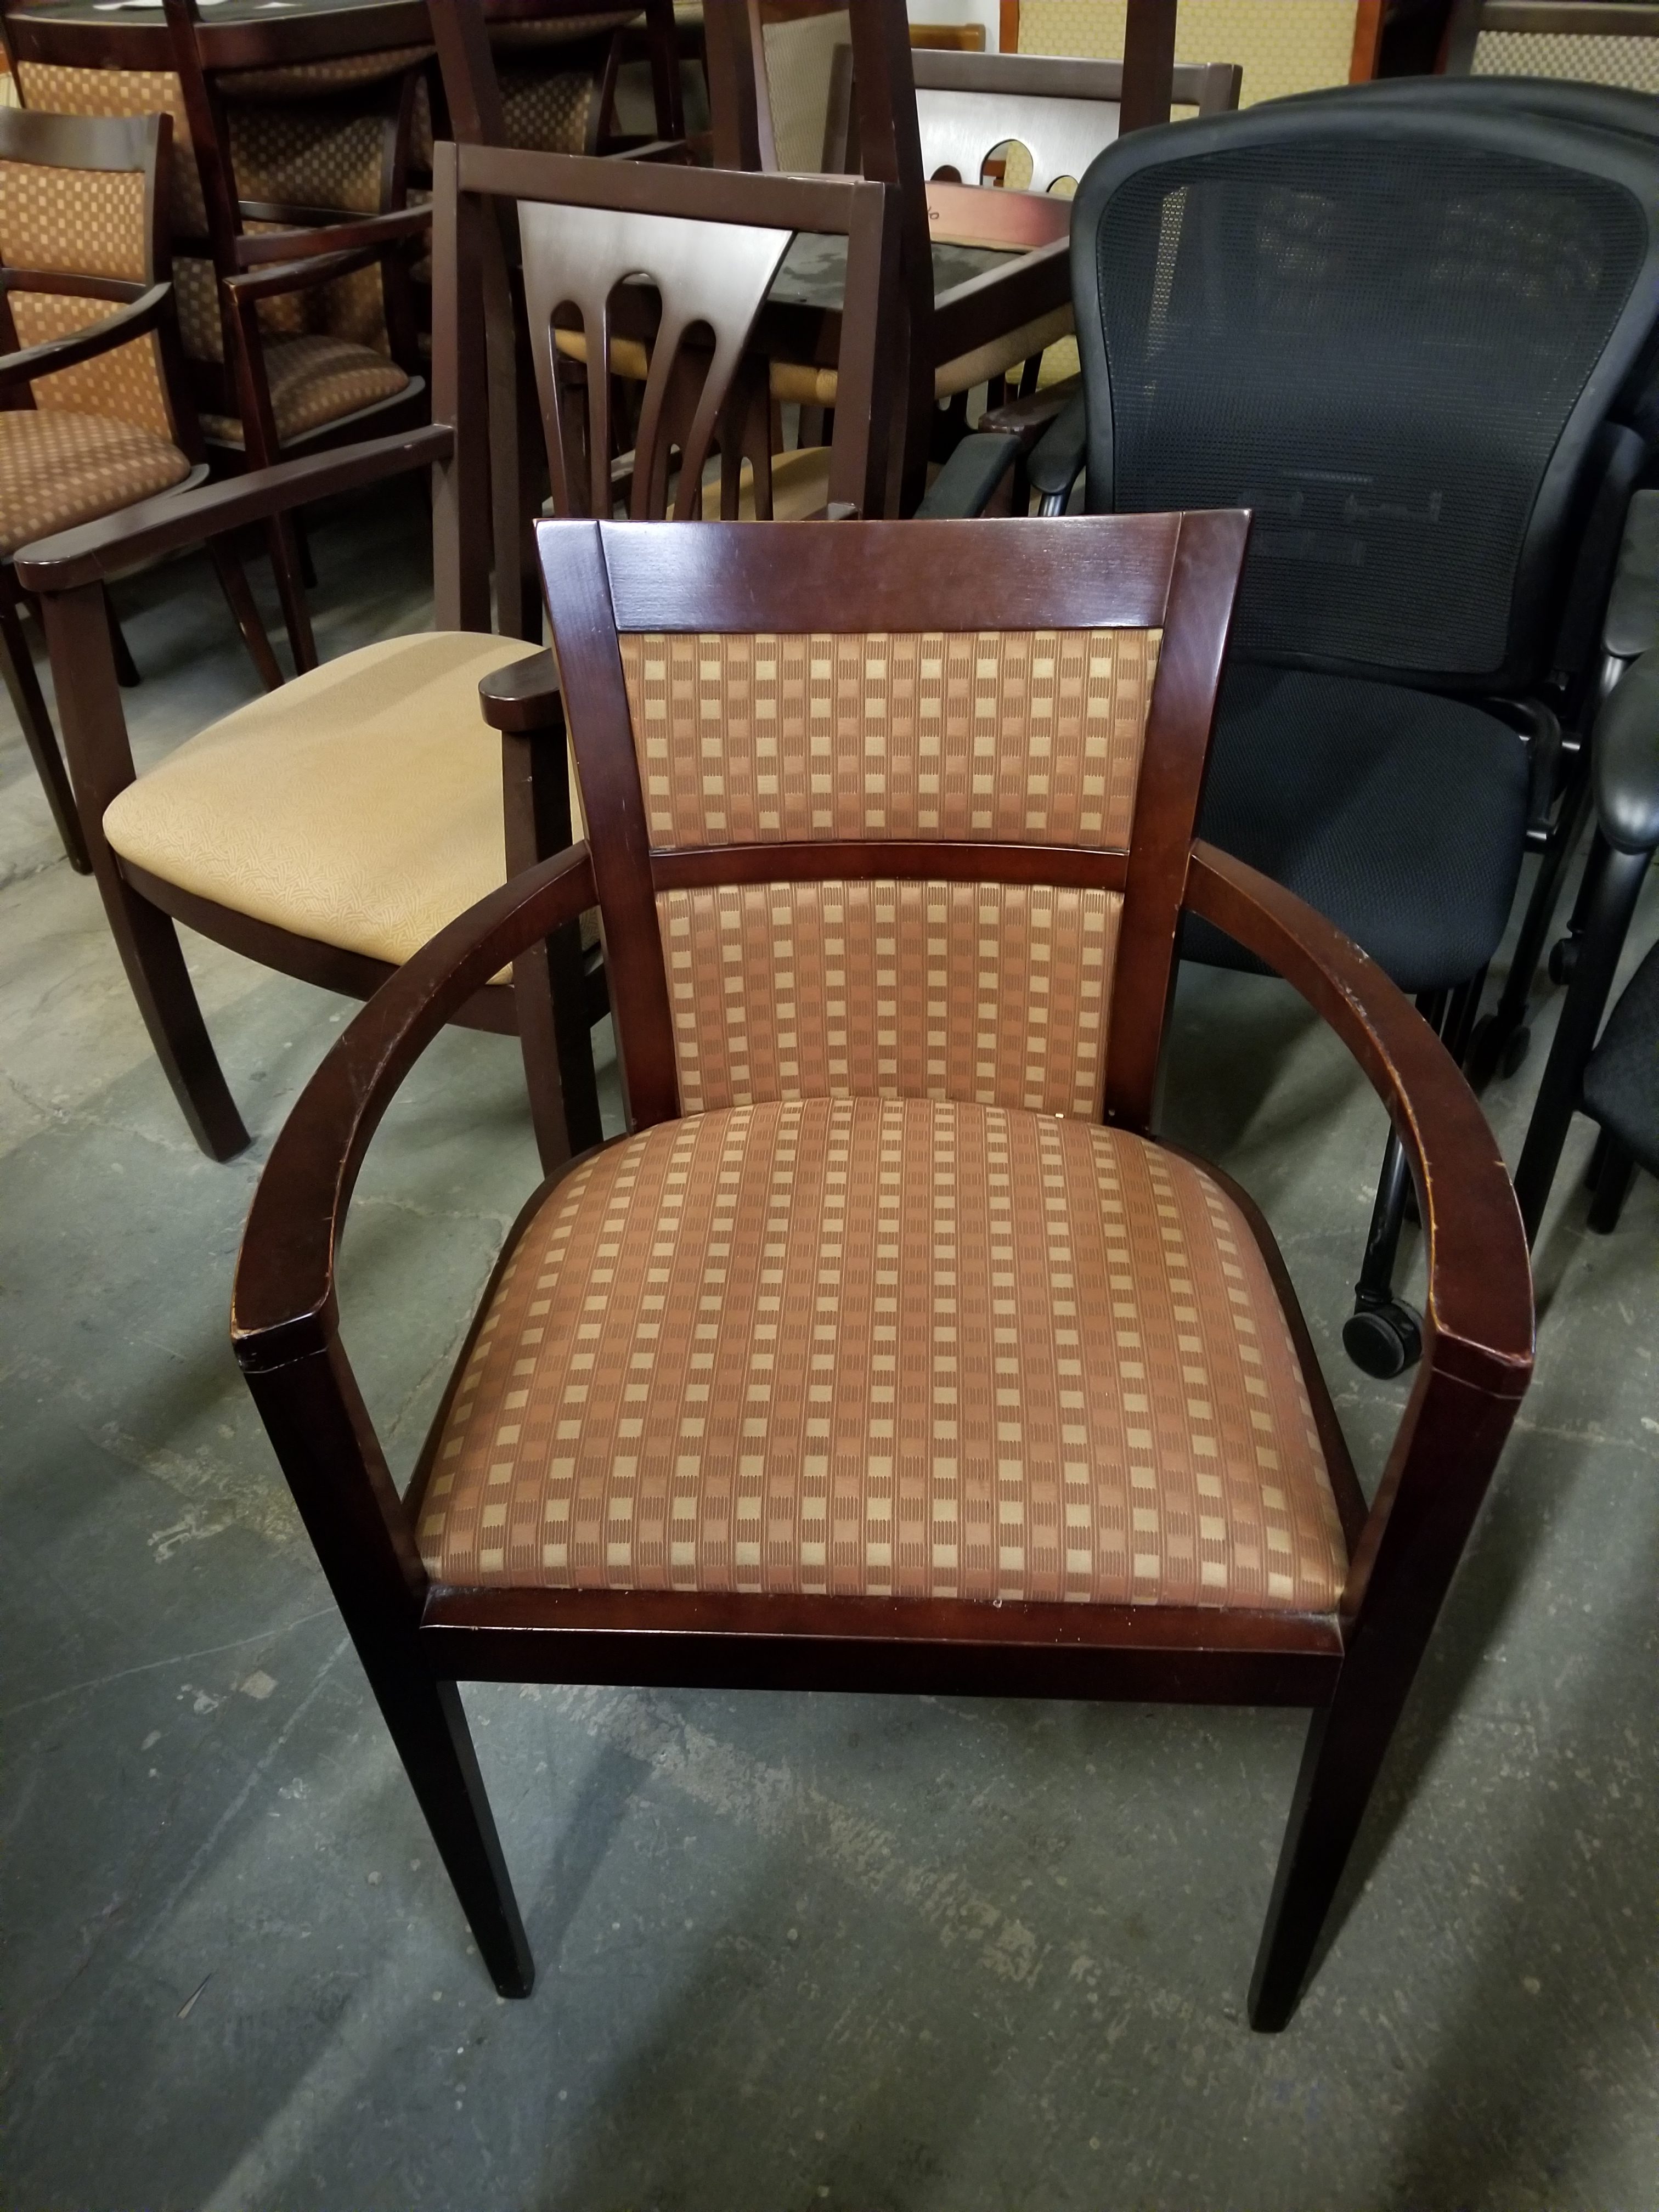 Upholstered Side Chairs With Arms